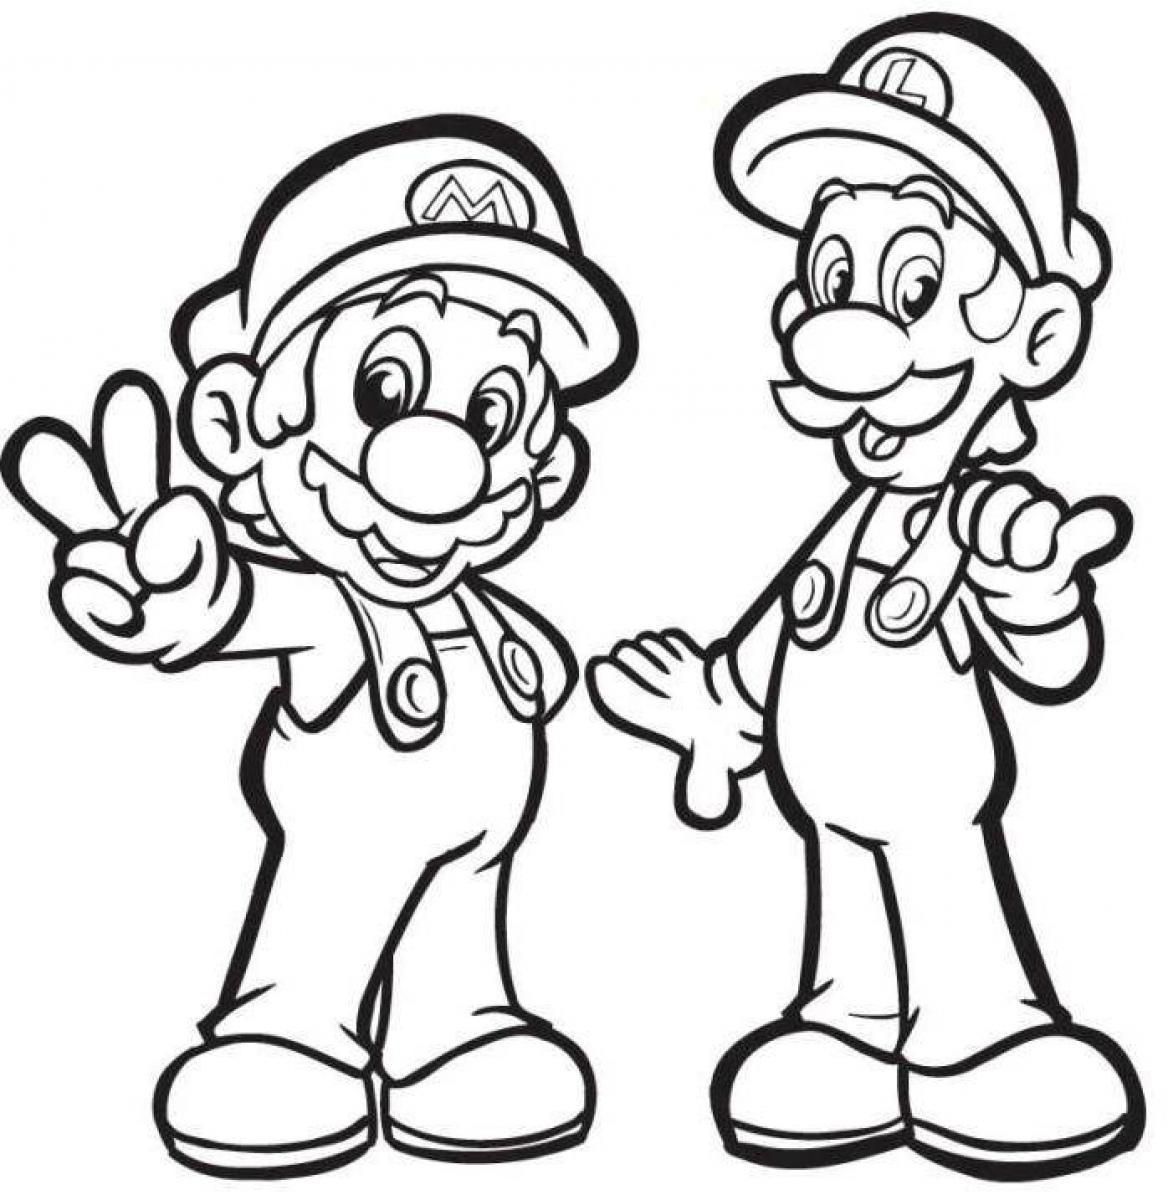 super-mario-coloring-pages-free-at-getdrawings-free-download